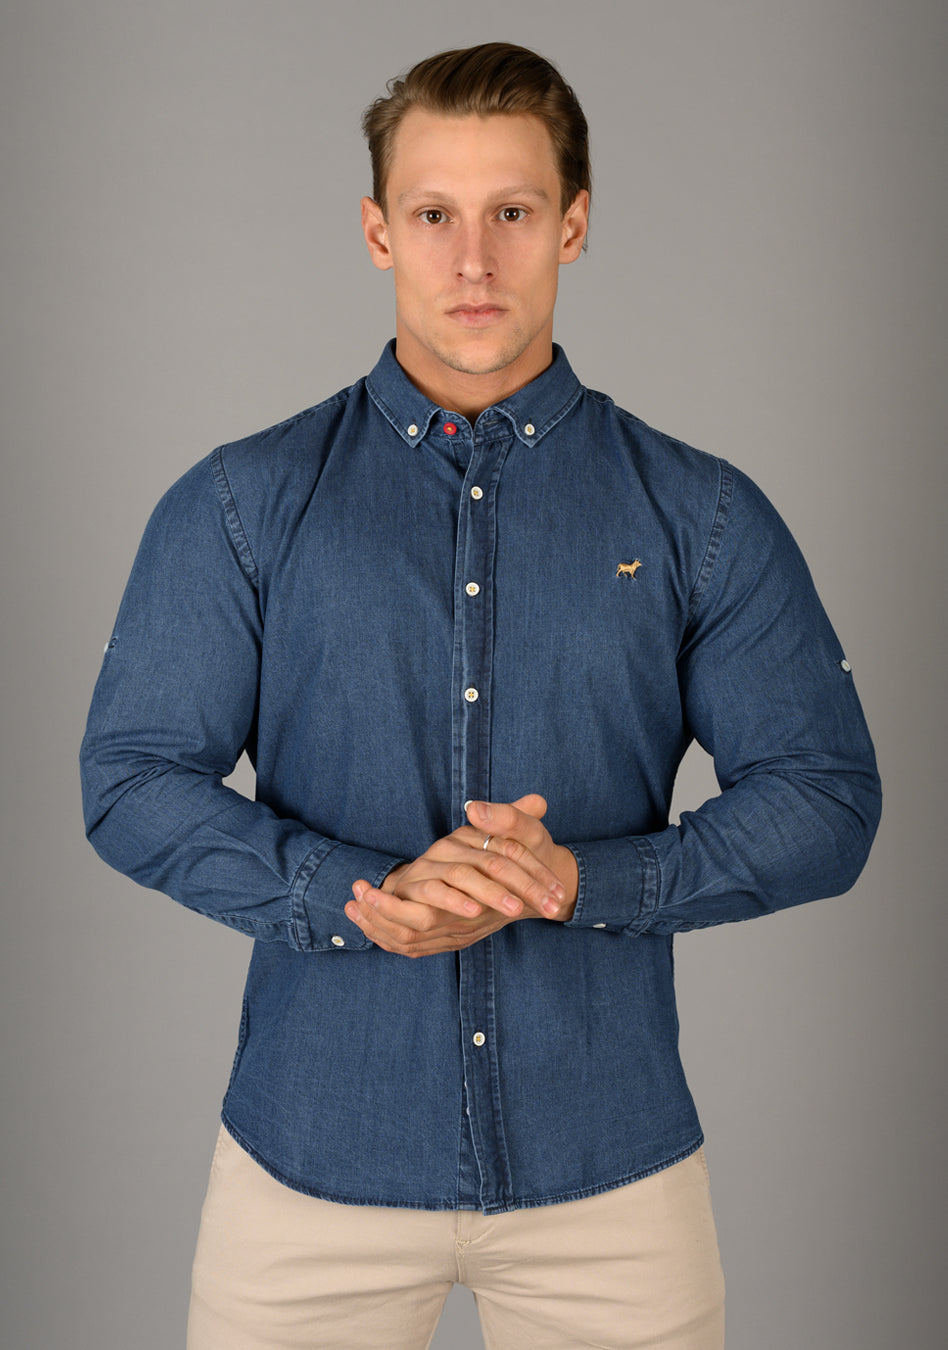 Blue Denim athletic fit shirt on an athletically built model, showcasing the muscle fit design that enhances physique, with stretch fabric for comfort and mobility